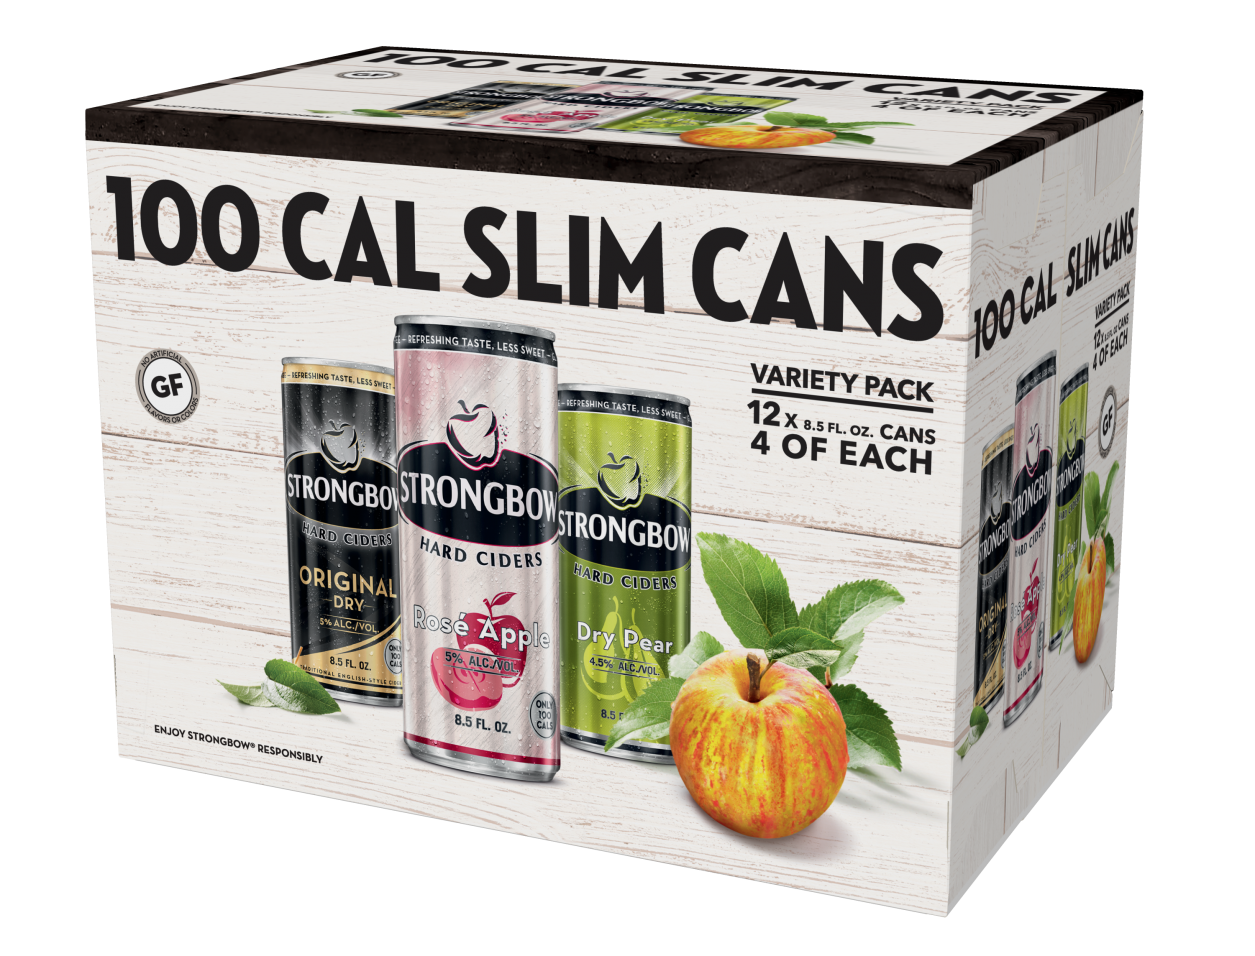 Strongbow Hard Cider 100 Cal Slim Cans